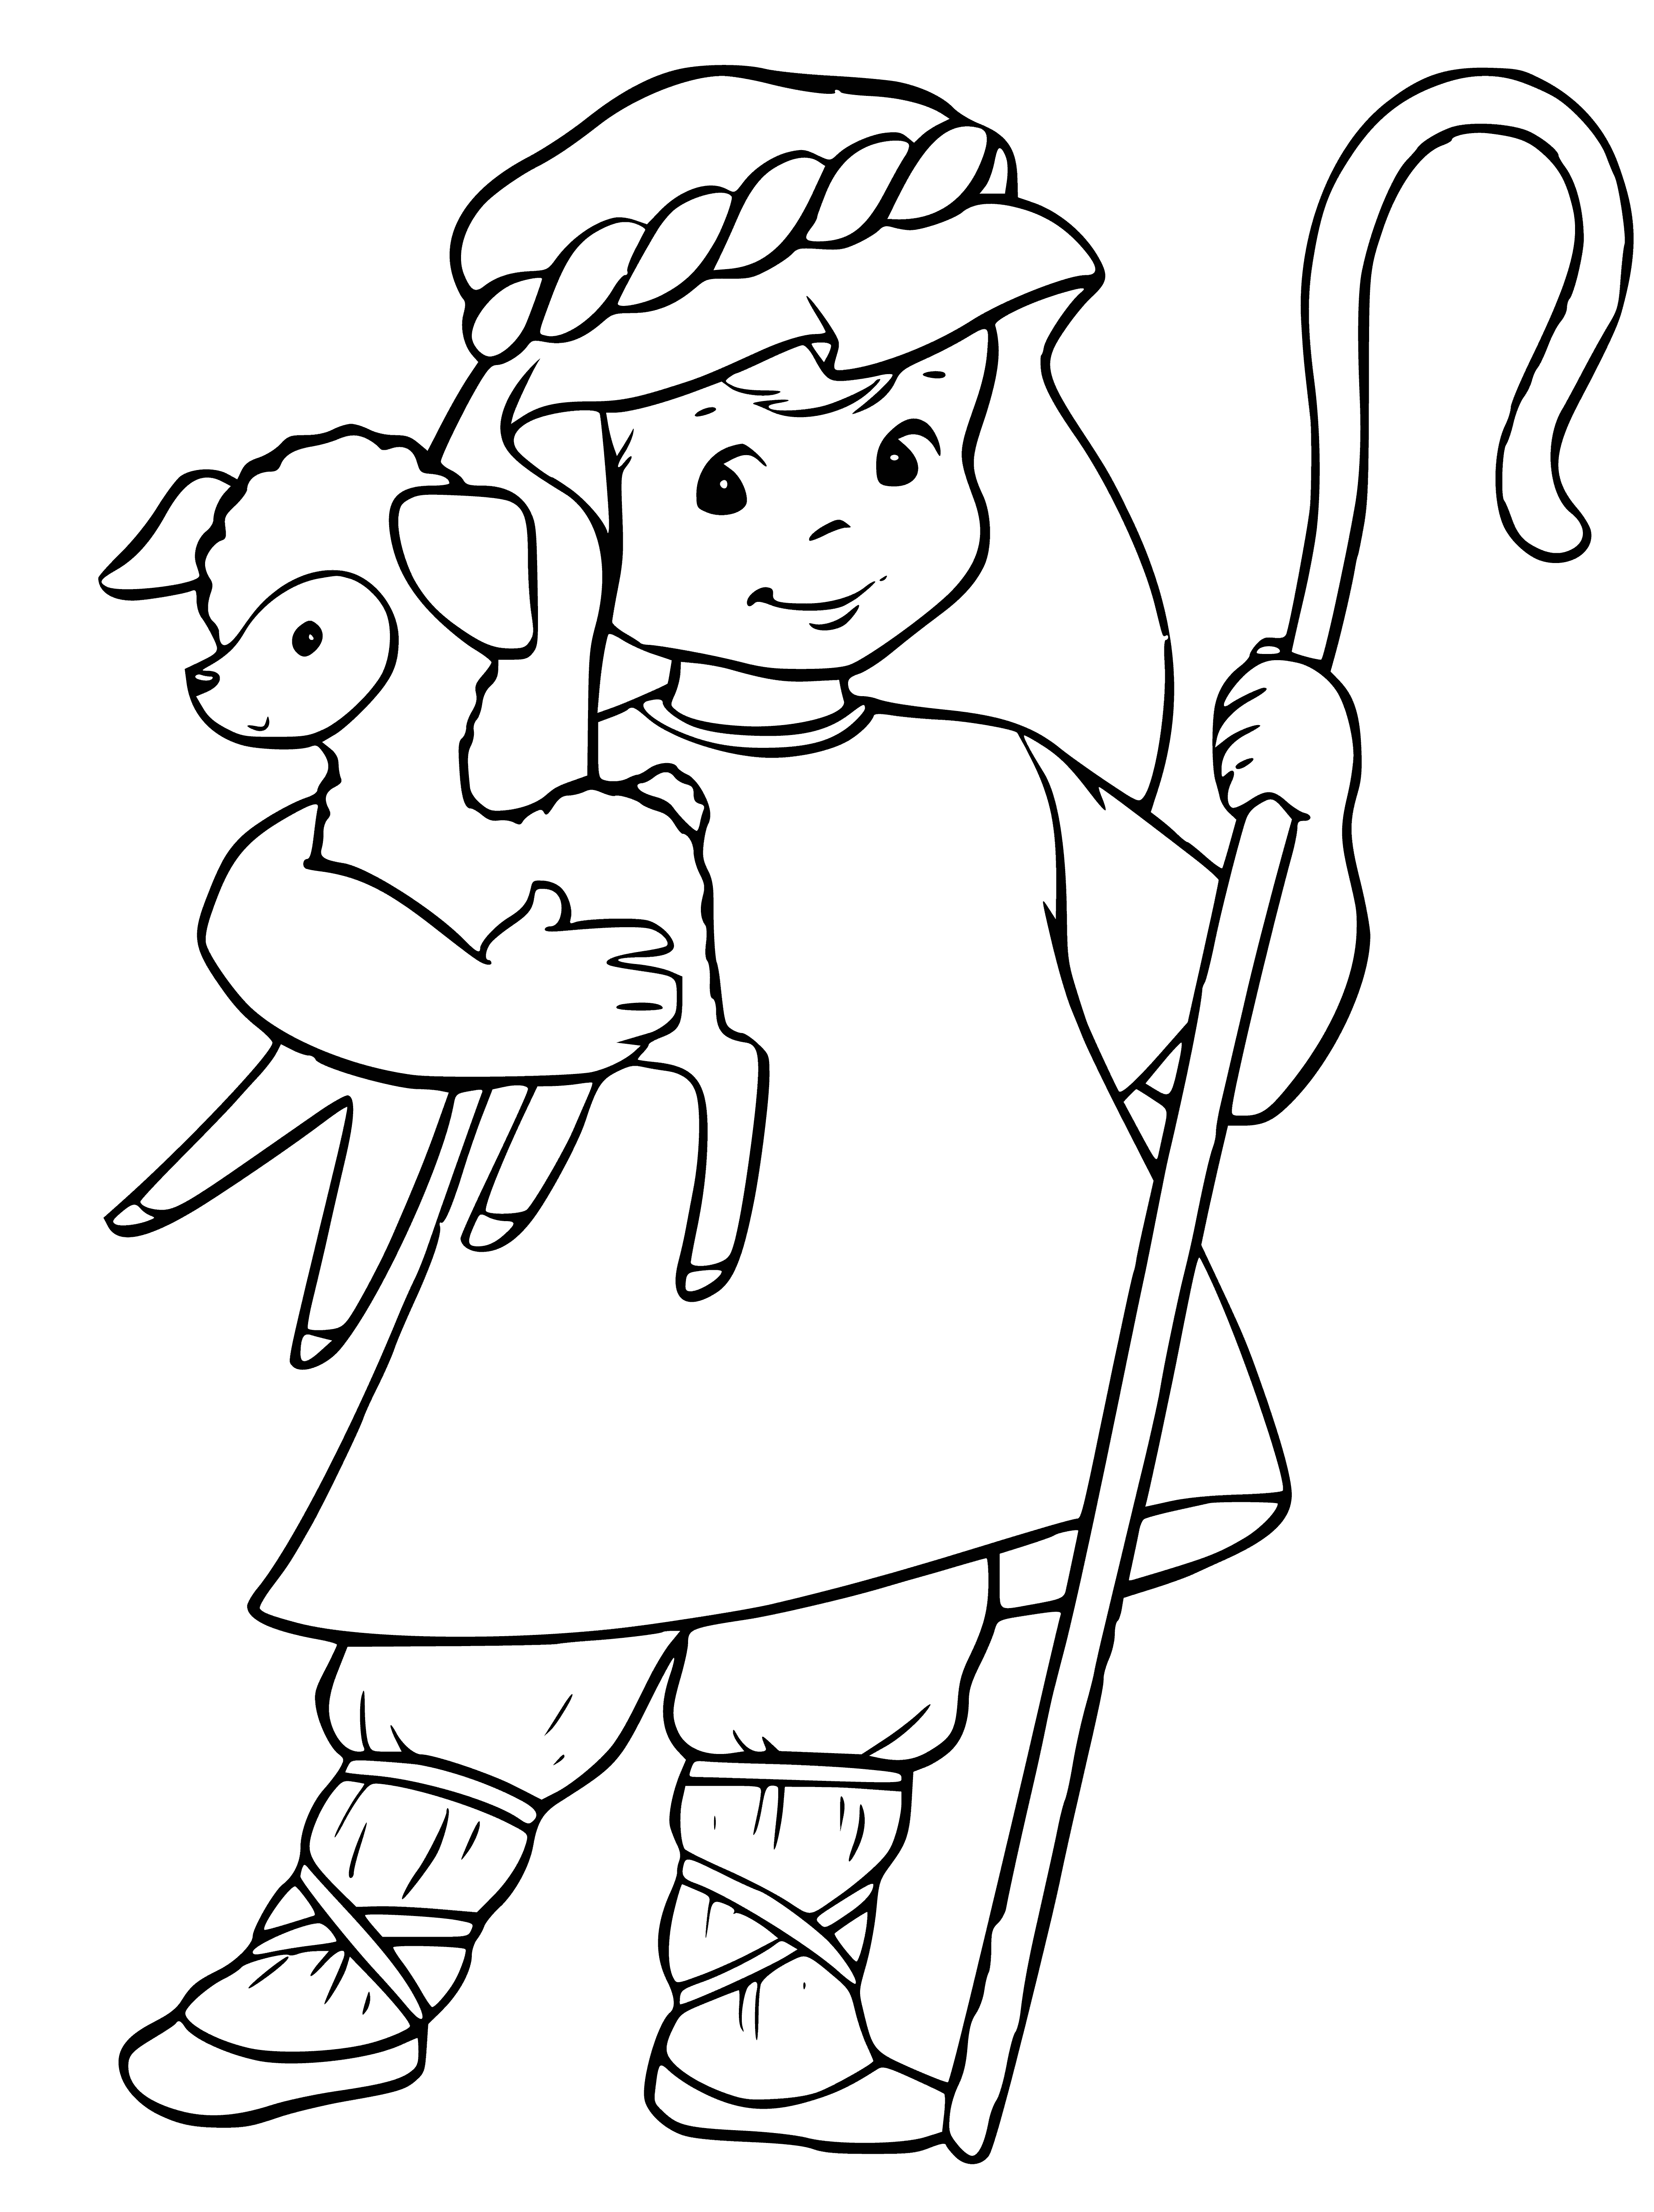 coloring page: They're wearing a costume with a sheep headpiece and earmuffs, plus a white jumpsuit with black spots. #NewYearsCostume